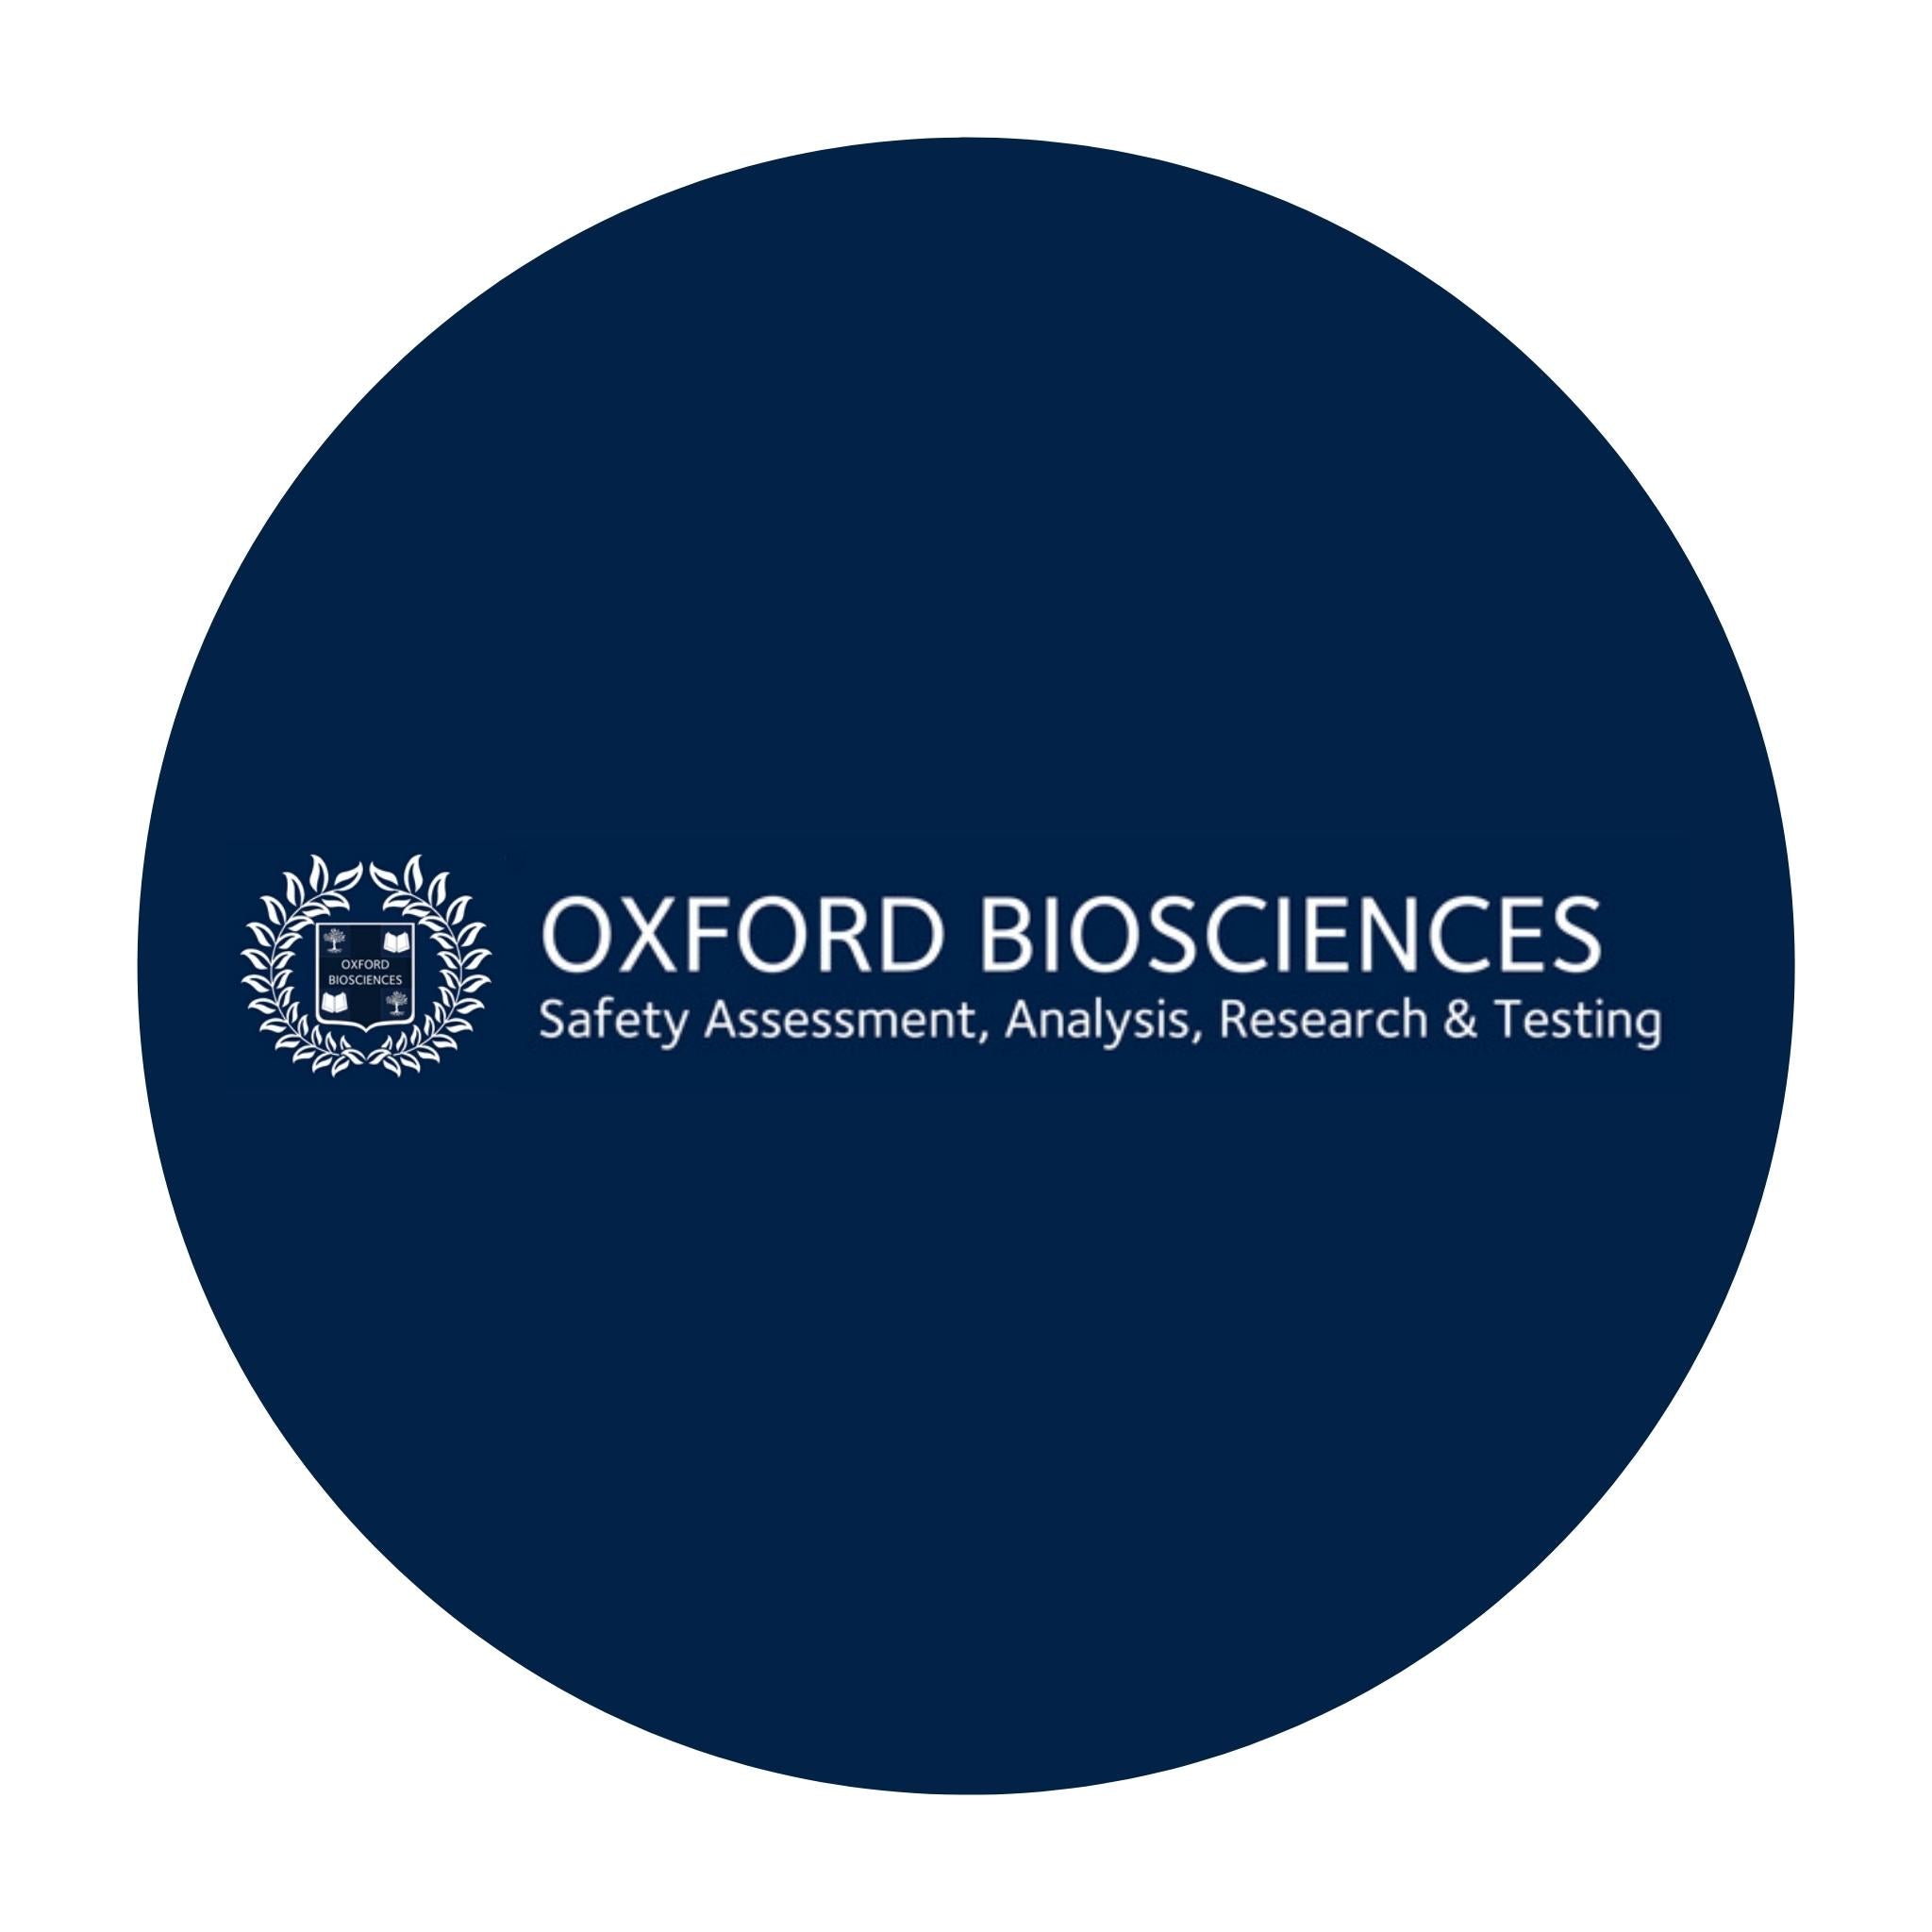 Obvs Skincare has been rigerously tested and approved safe by Oxford Biosciences, so you can be rest assured that you are in good hands